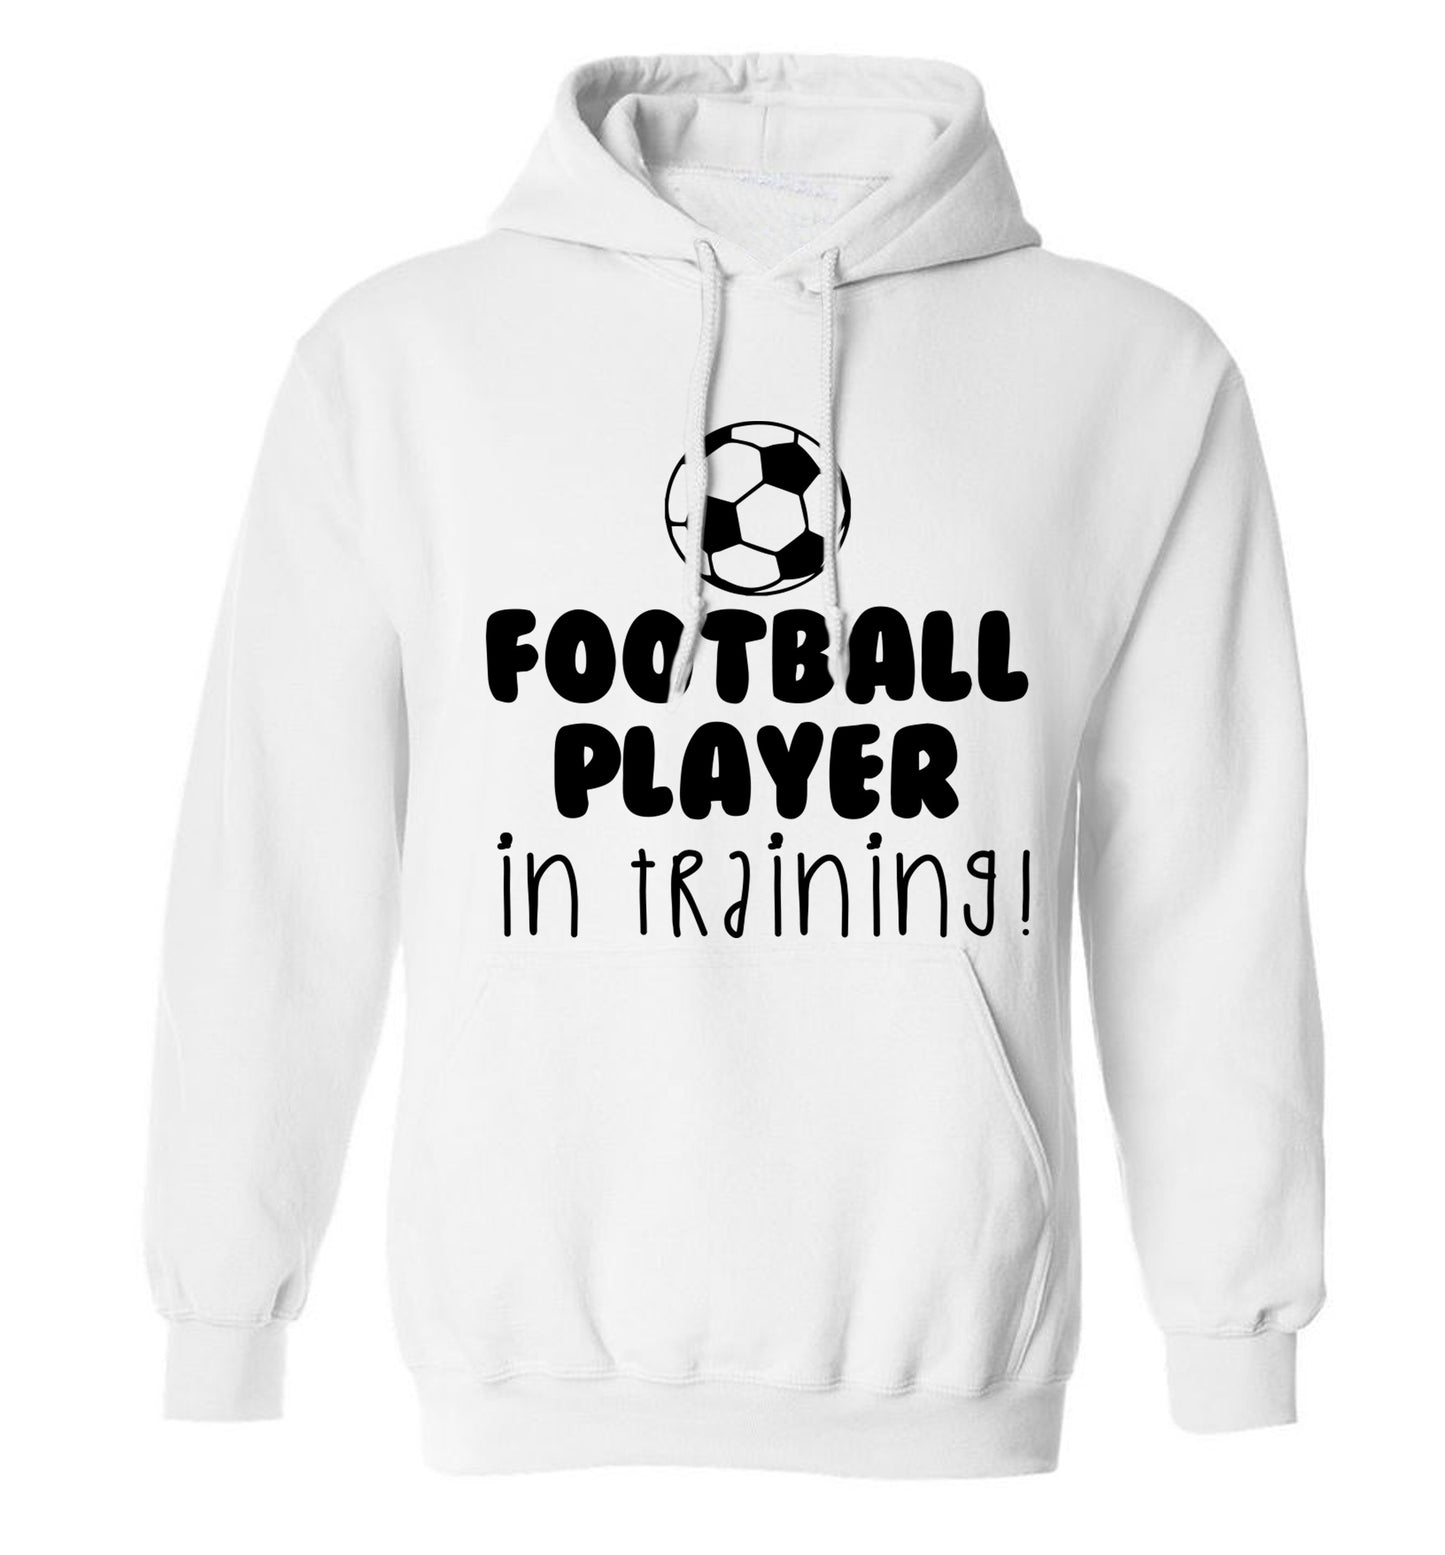 Football player in training adults unisex white hoodie 2XL